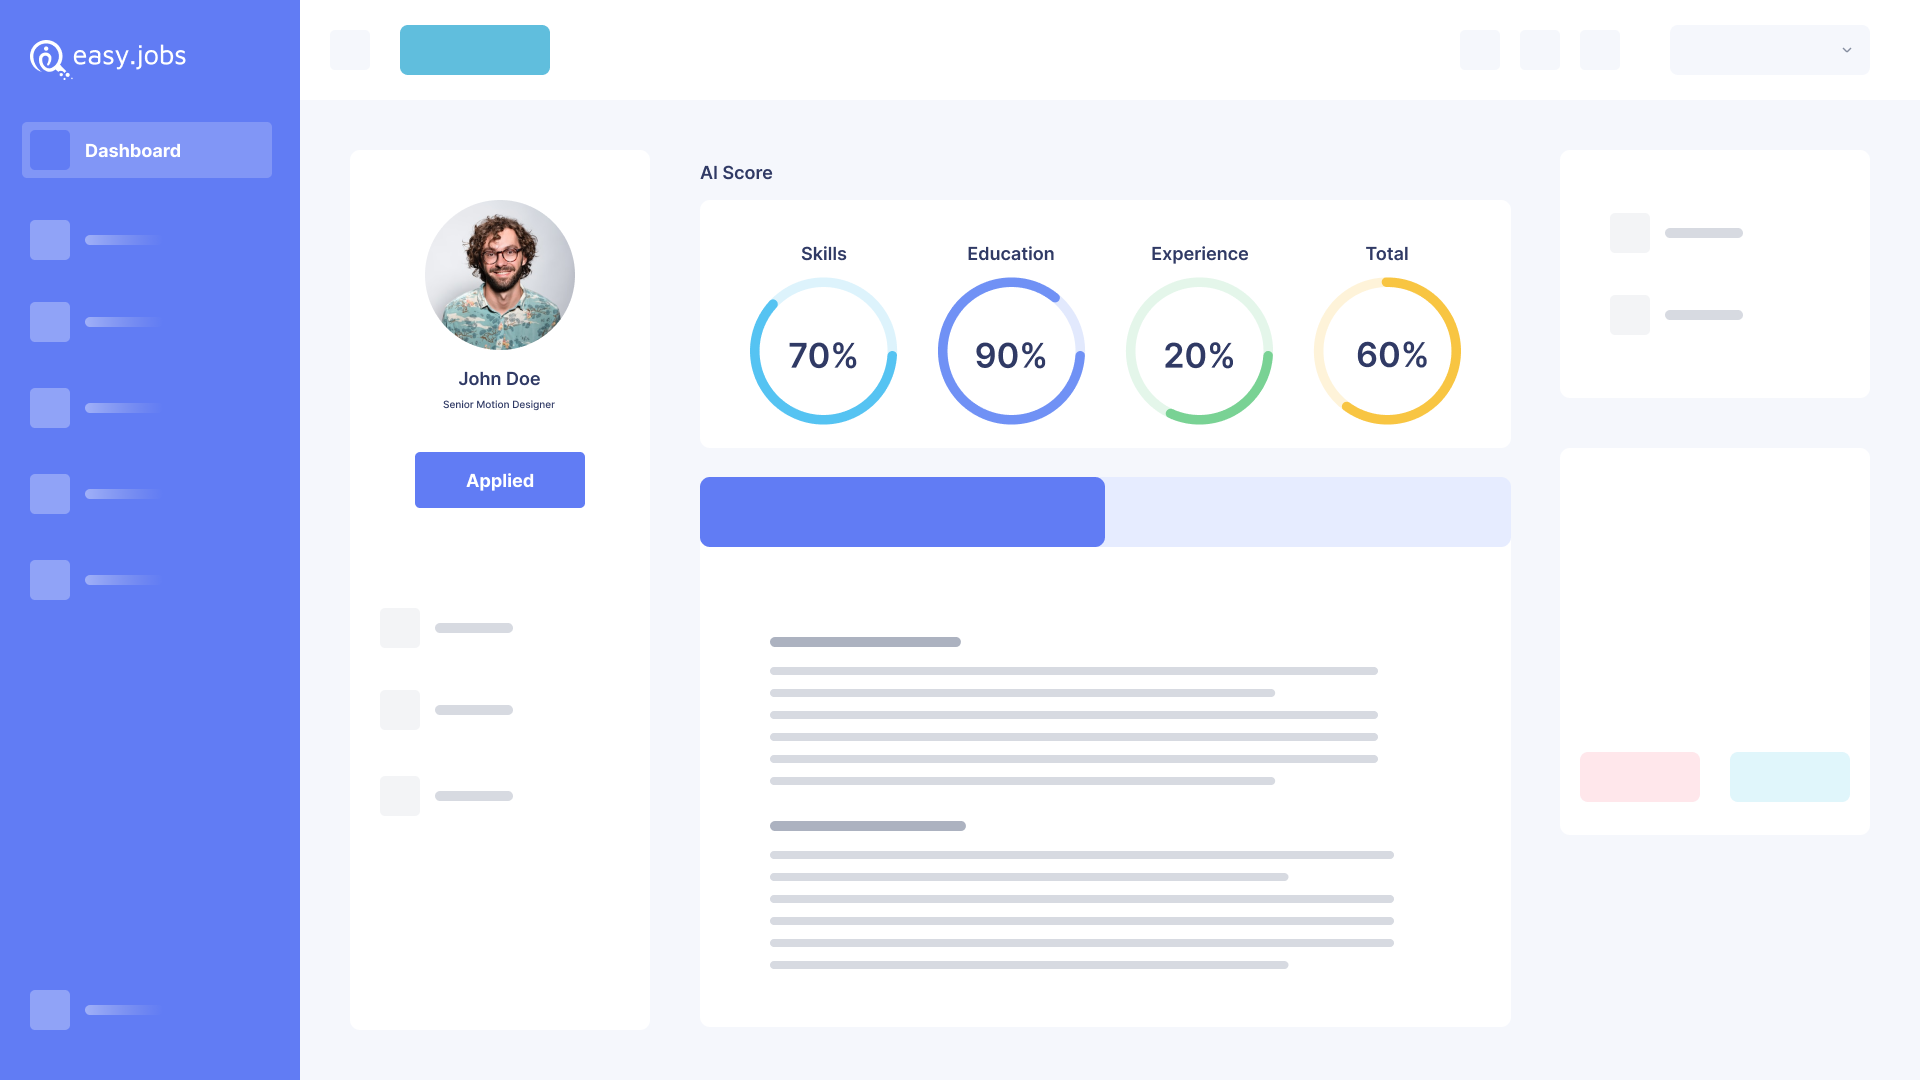 You can easily use smart AI to score a candidate in easy.jobs to get insights. Within seconds, the AI will match the candidate’s qualifications with your job description and give them an accurate score based on skills, experience and education.